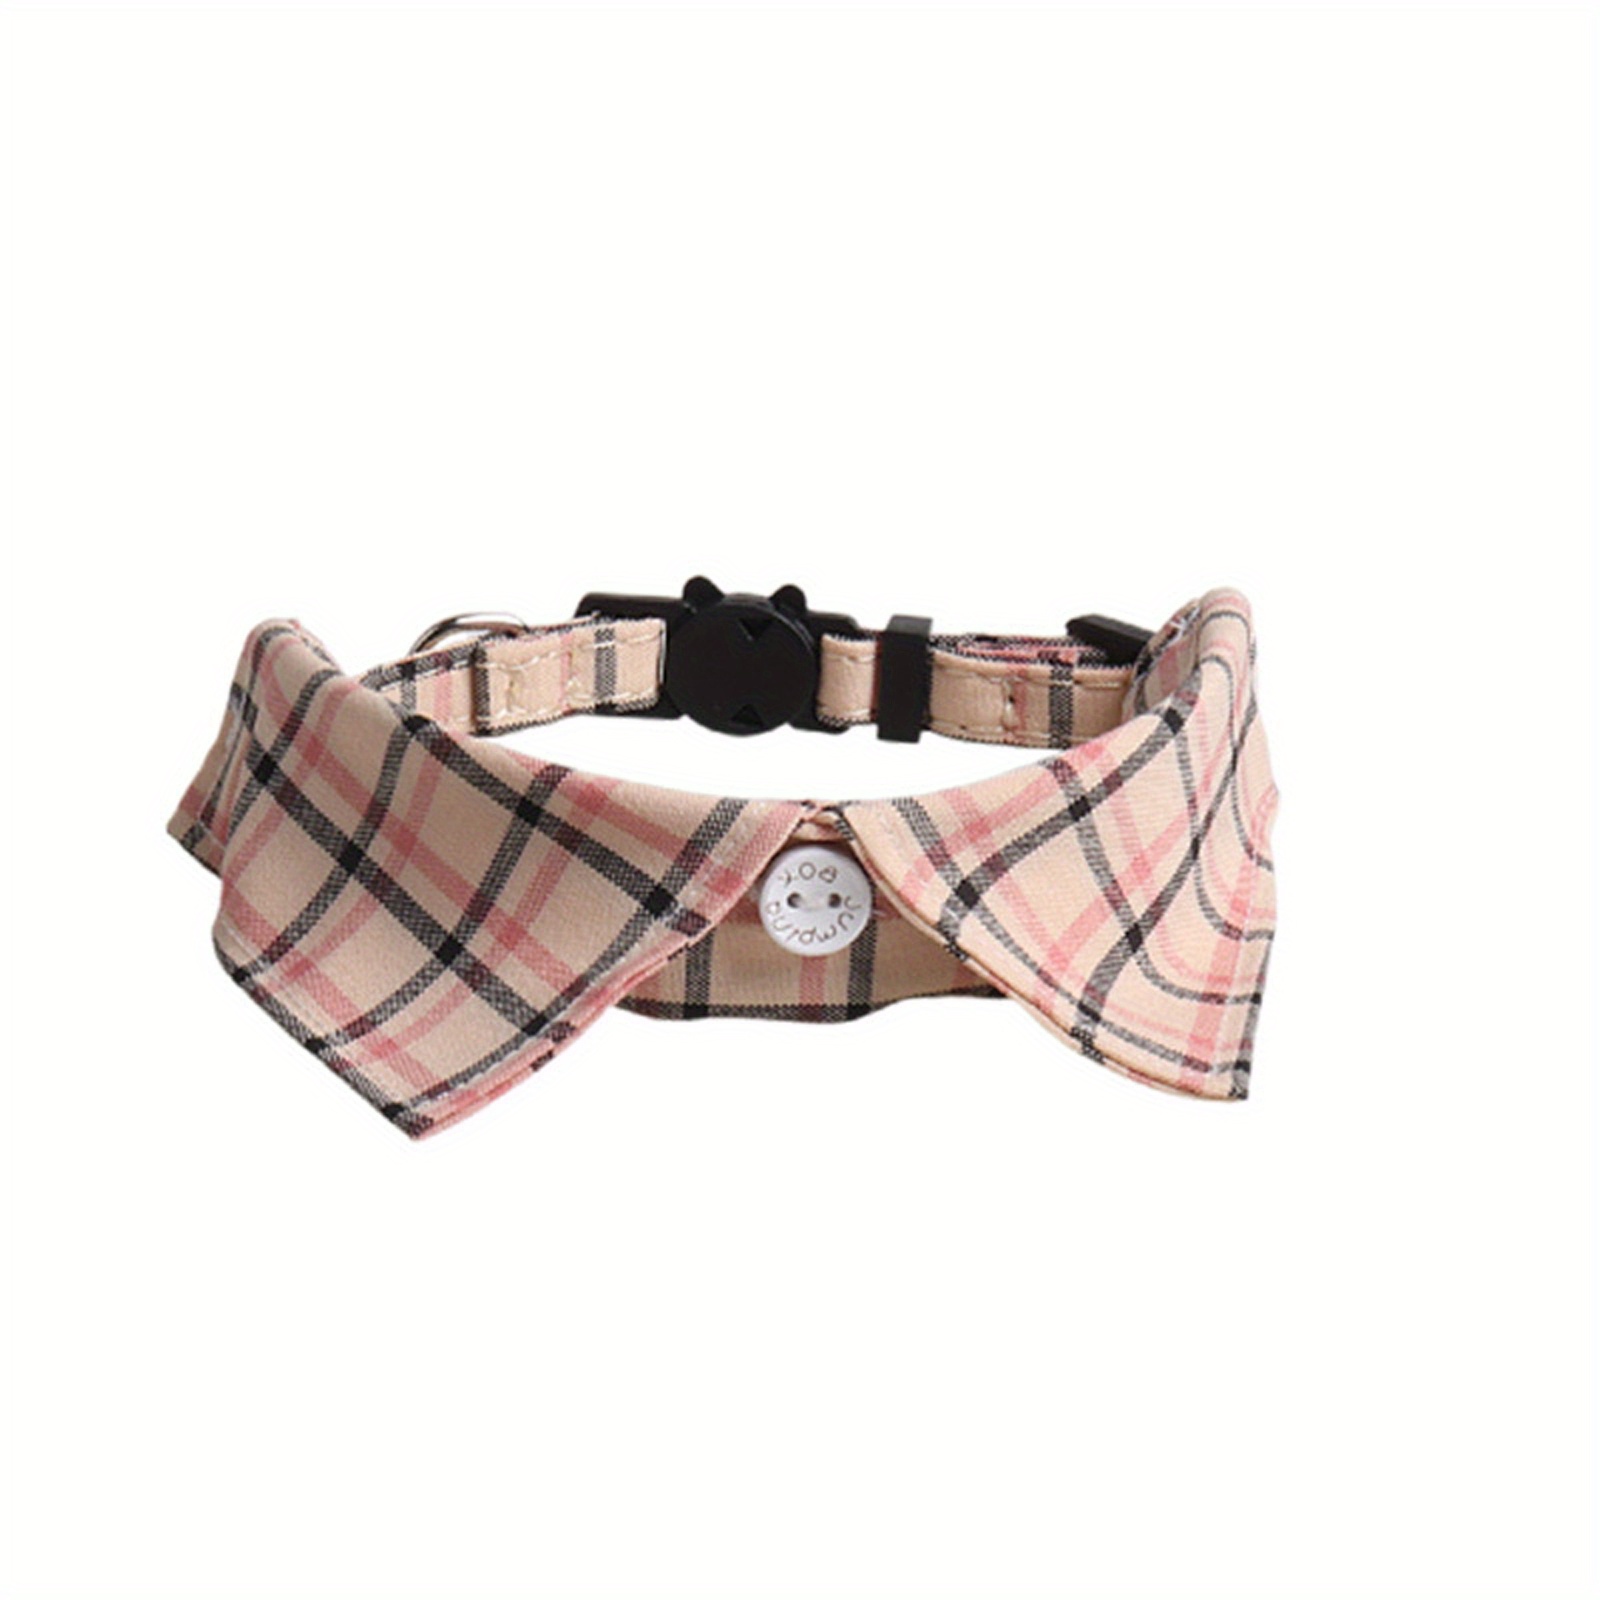 Cute & Stylish Bow Tie Collars For Dogs & Cats - Quick-release Buckle &  Adjustable Fit! - Temu Austria